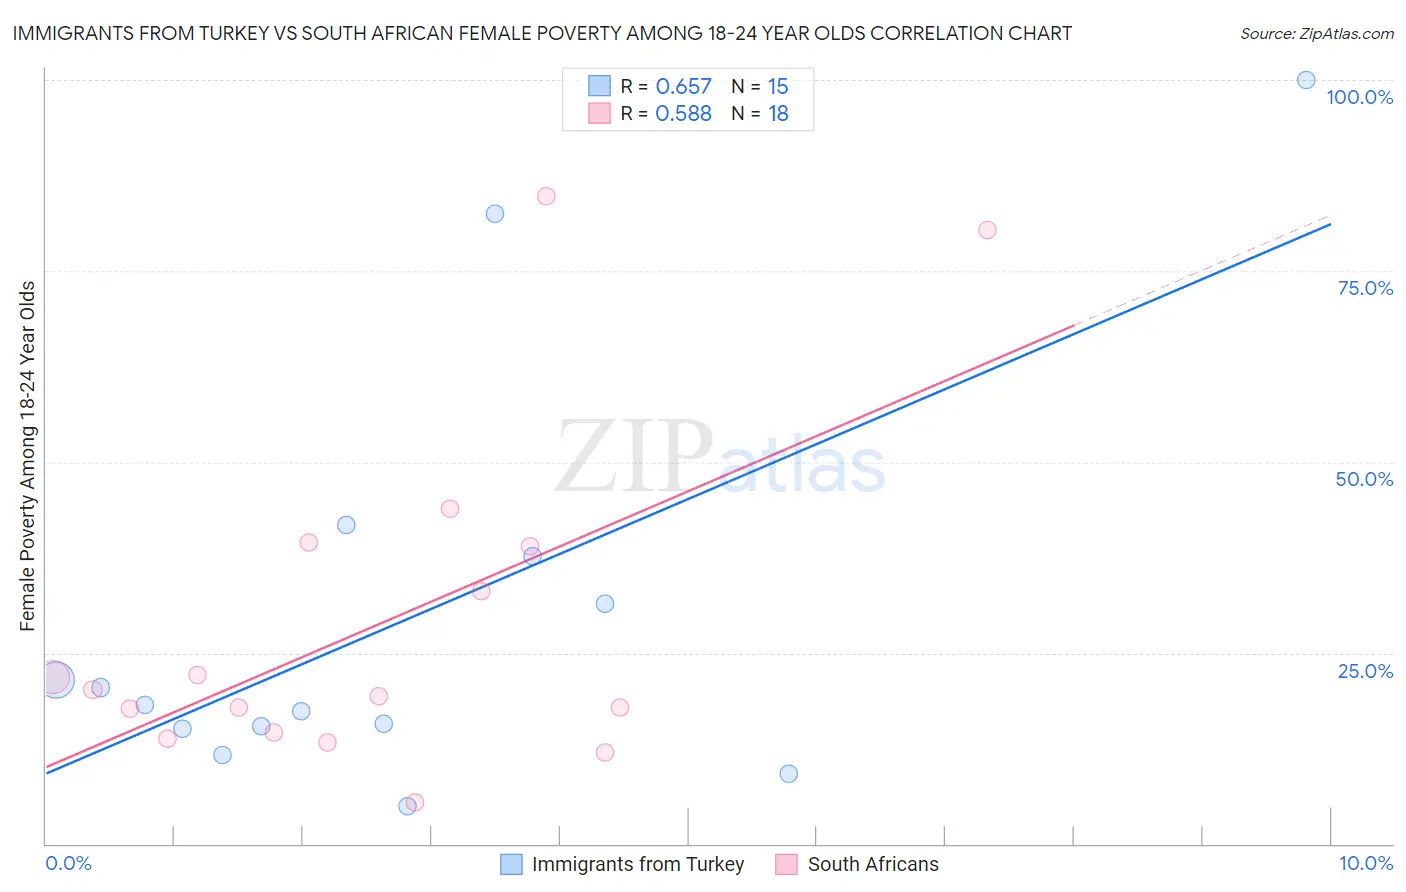 Immigrants from Turkey vs South African Female Poverty Among 18-24 Year Olds